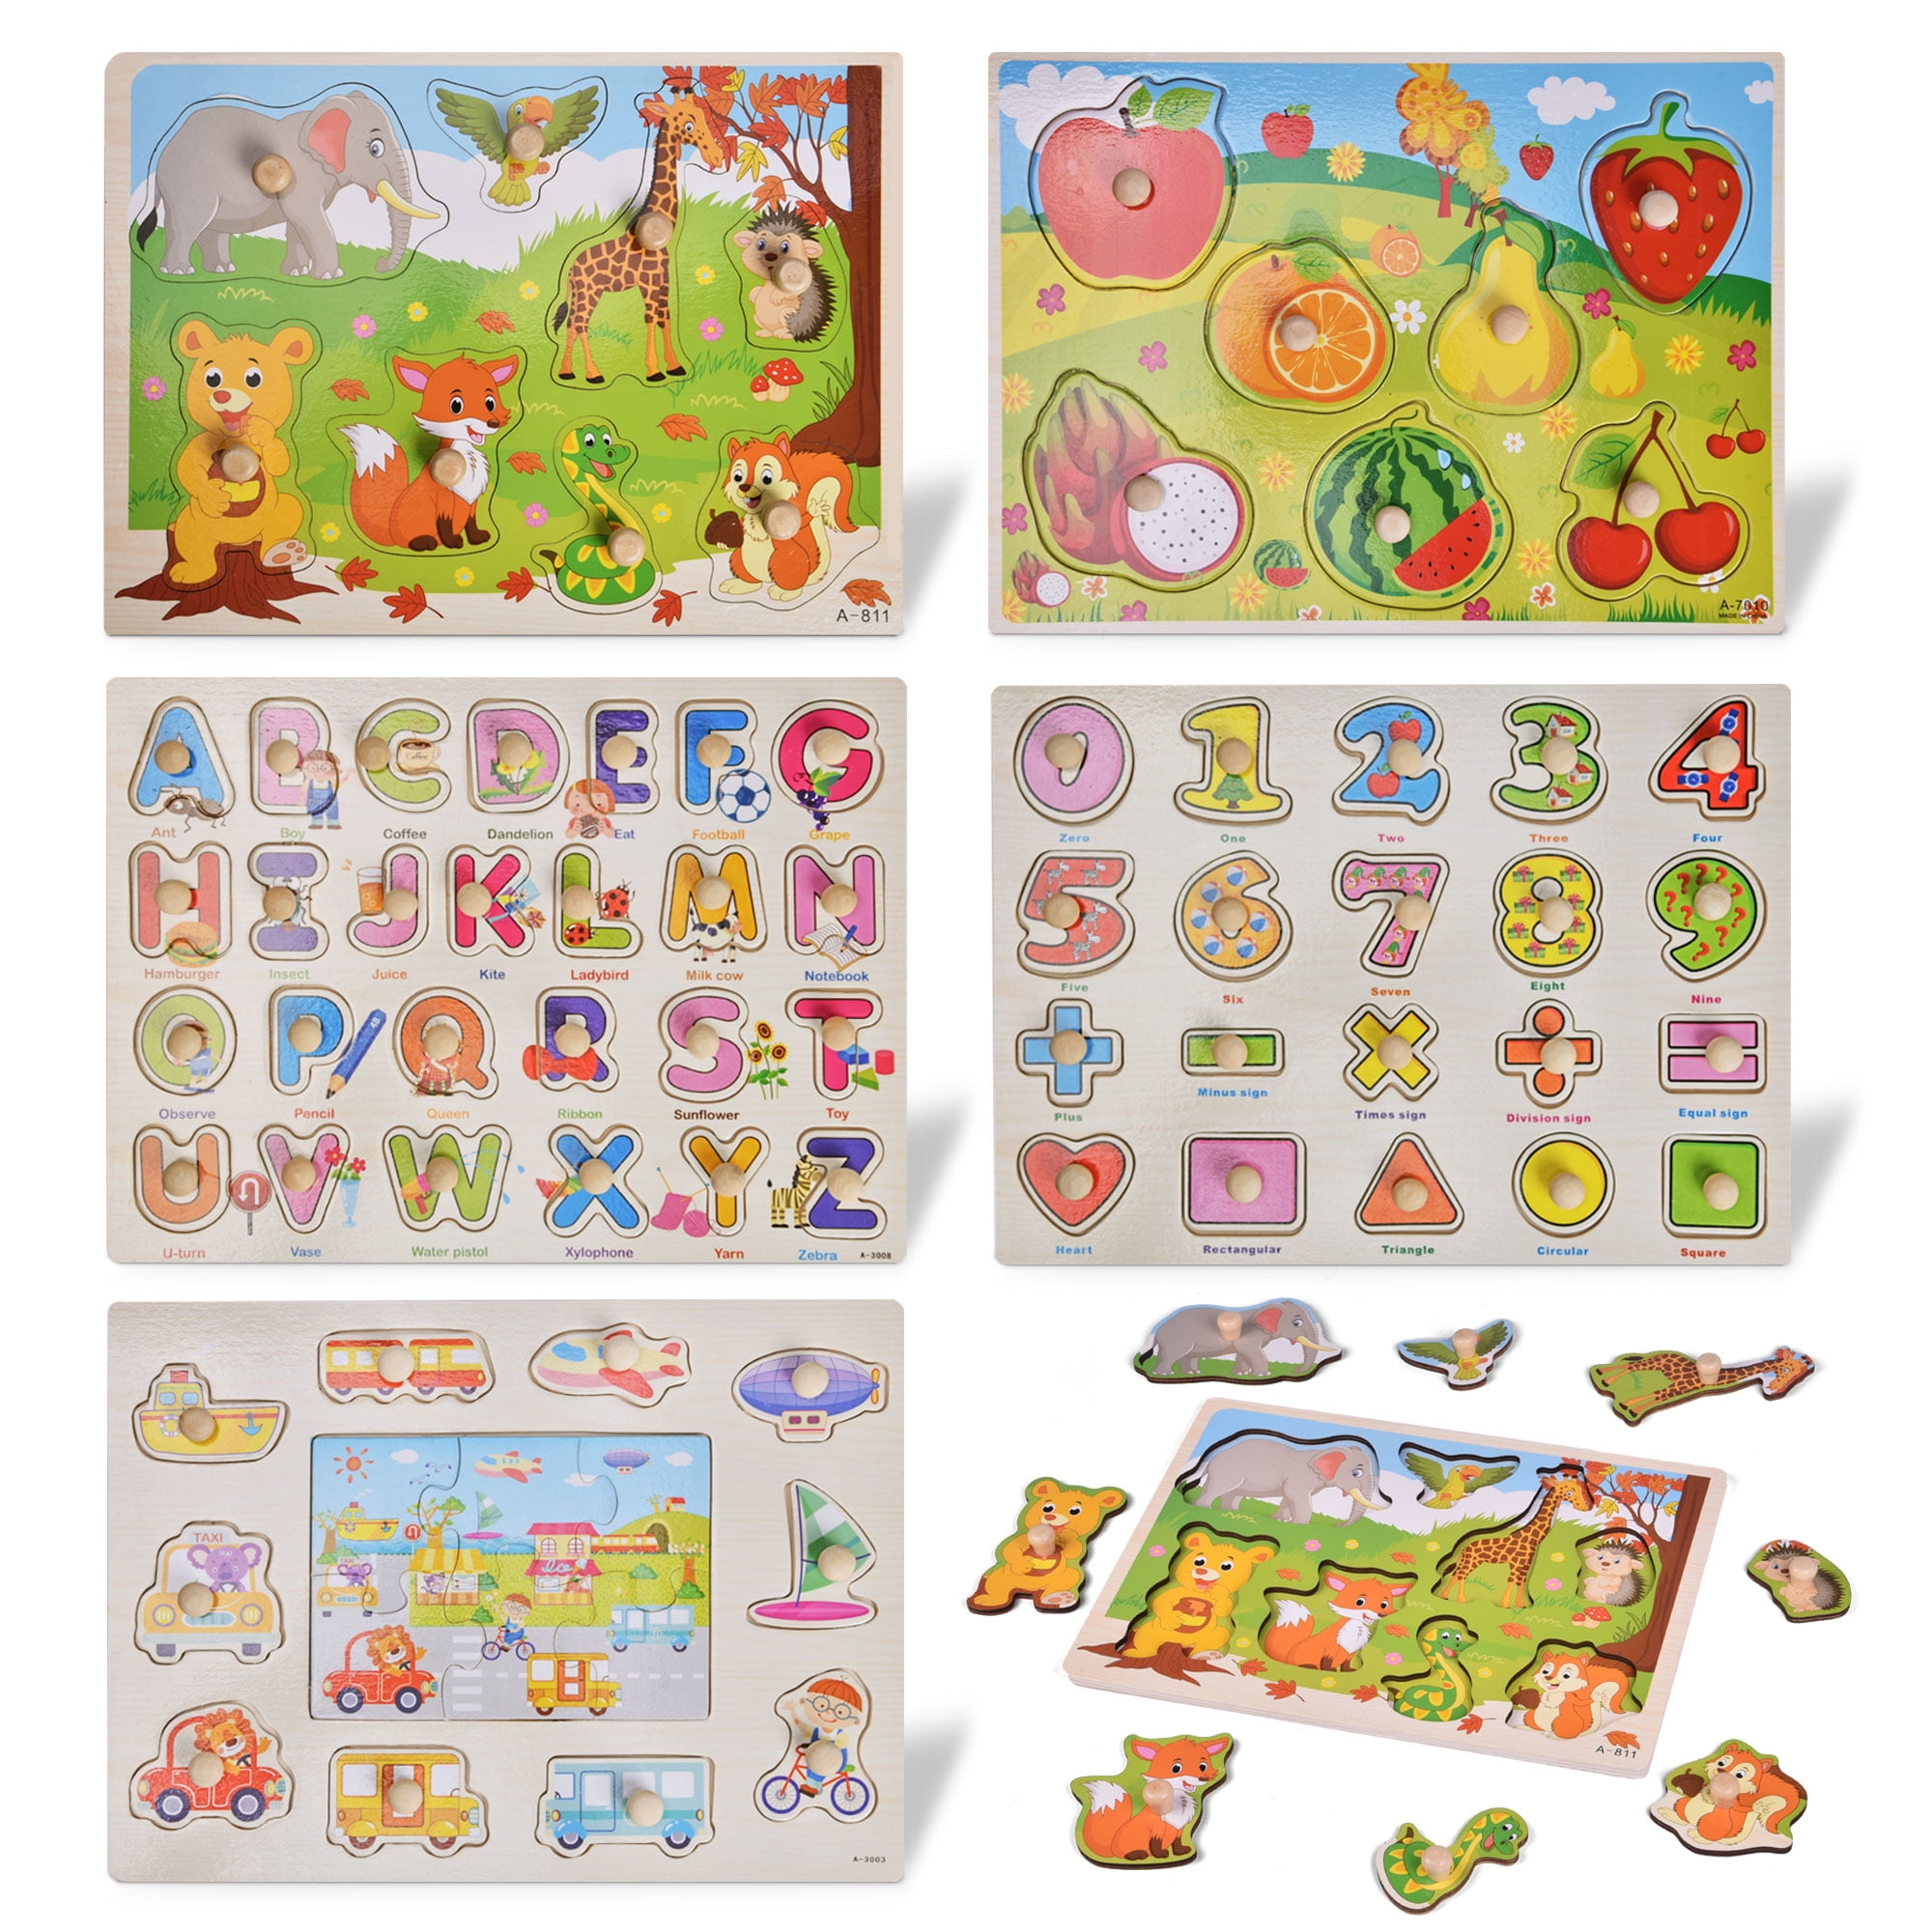 CHILDREN MINI LEARNING WOODEN PUZZLES JIGSAW EDUCATIONAL TOY ANIMALS VEHICLES 